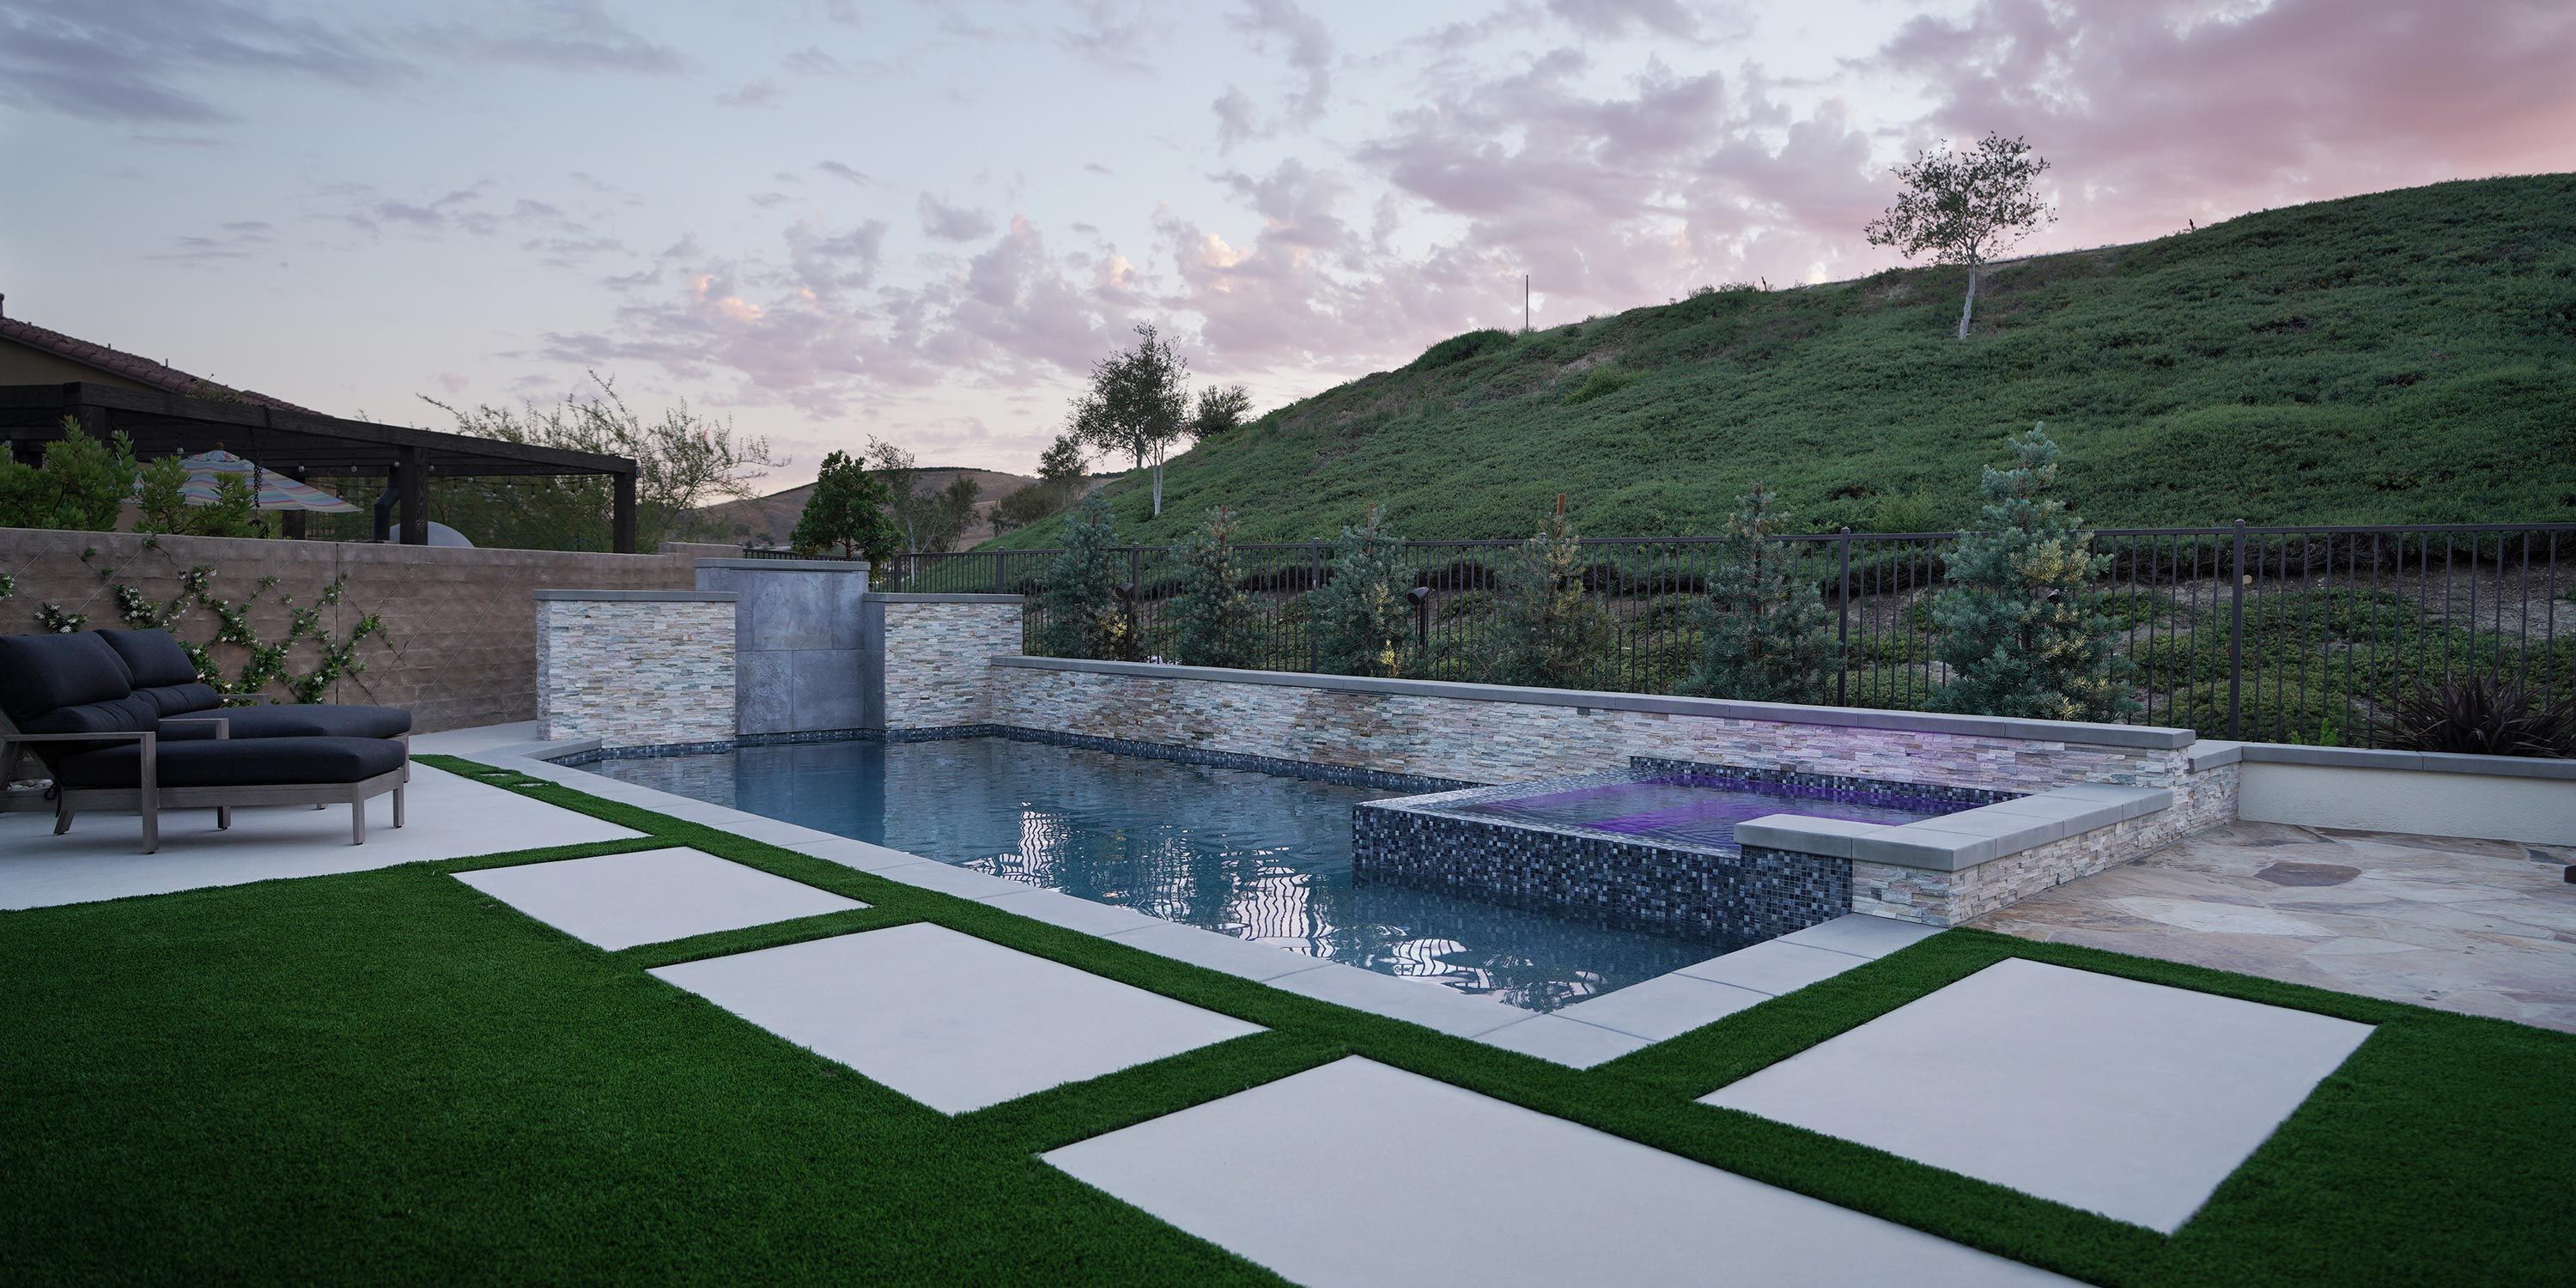 A serene backyard scene with a modern pool and spa area. The pool is bordered by stone tiles and features a waterfall. Two dark lounge chairs sit on the left, on a patio with artificial grass accents. In the background, a green hillside under a pastel evening sky completes the peaceful atmosphere.